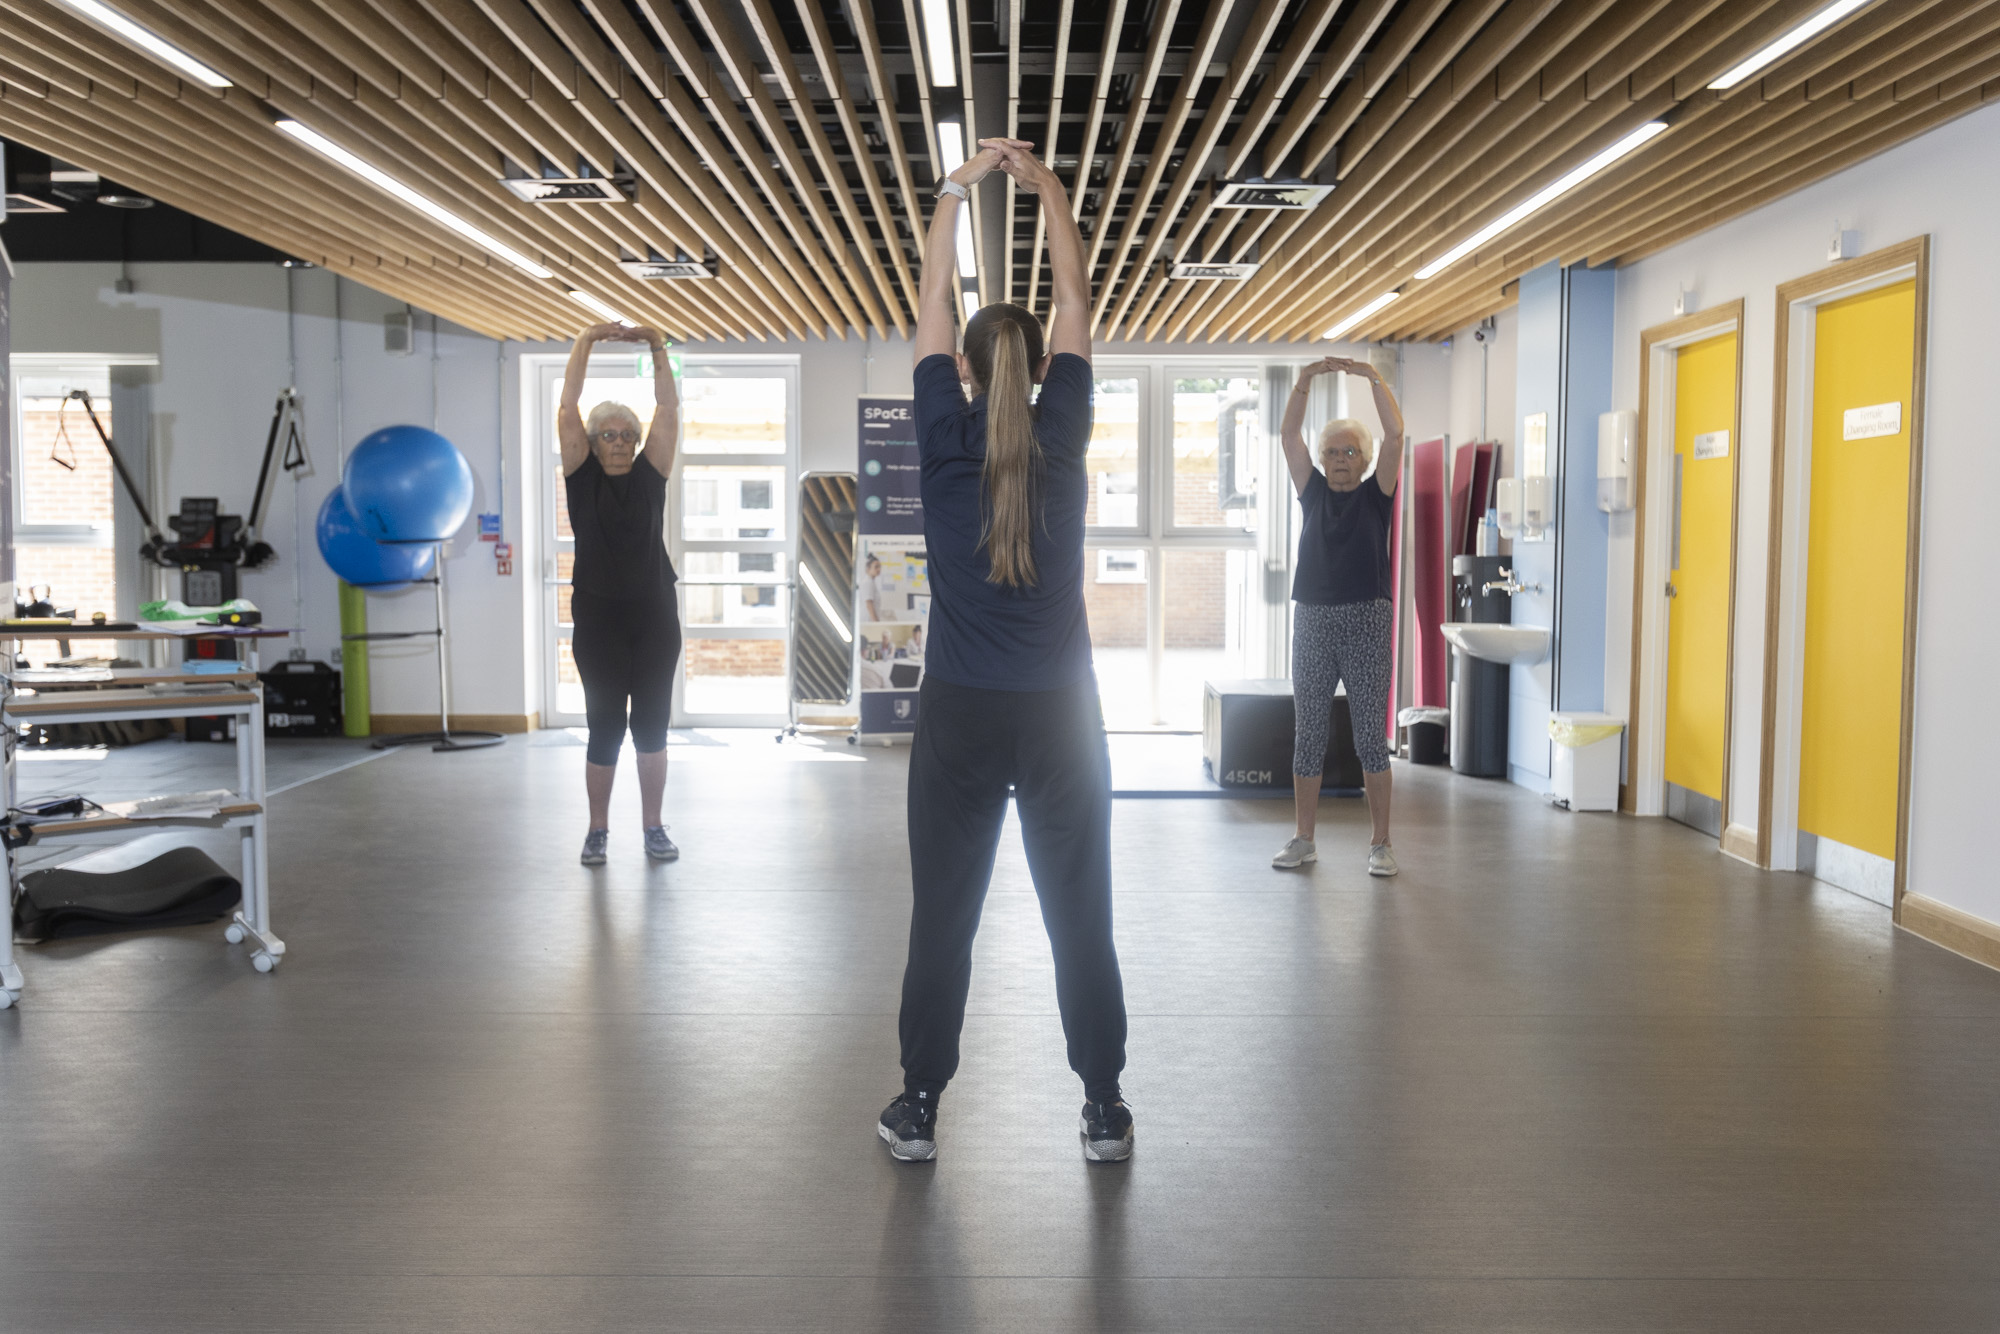 exercise class with three patients led by a physiotherapist